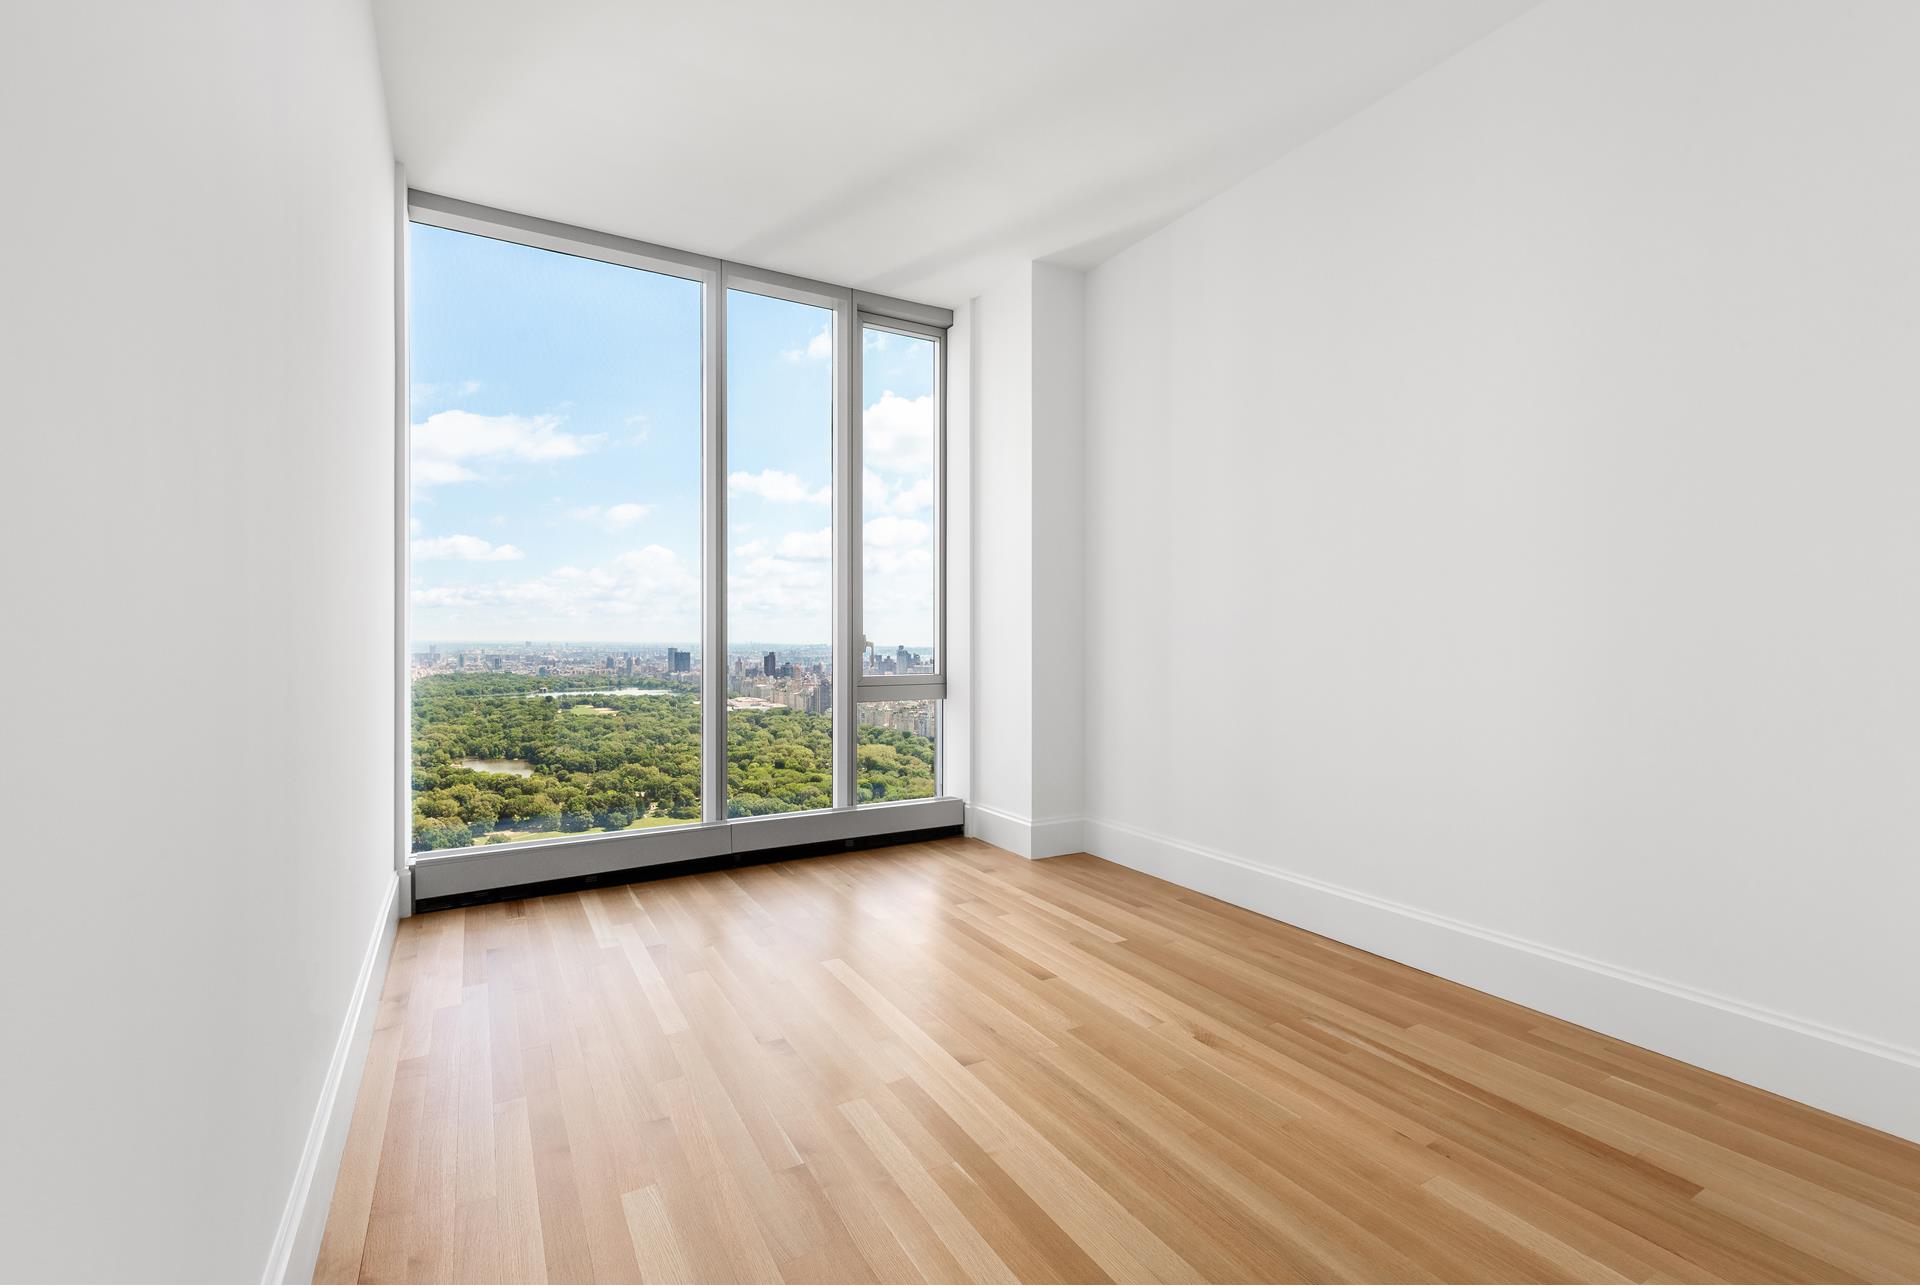 217 West 57th Street 55N, Central Park South, Midtown West, NYC - 2 Bedrooms  
2.5 Bathrooms  
4 Rooms - 